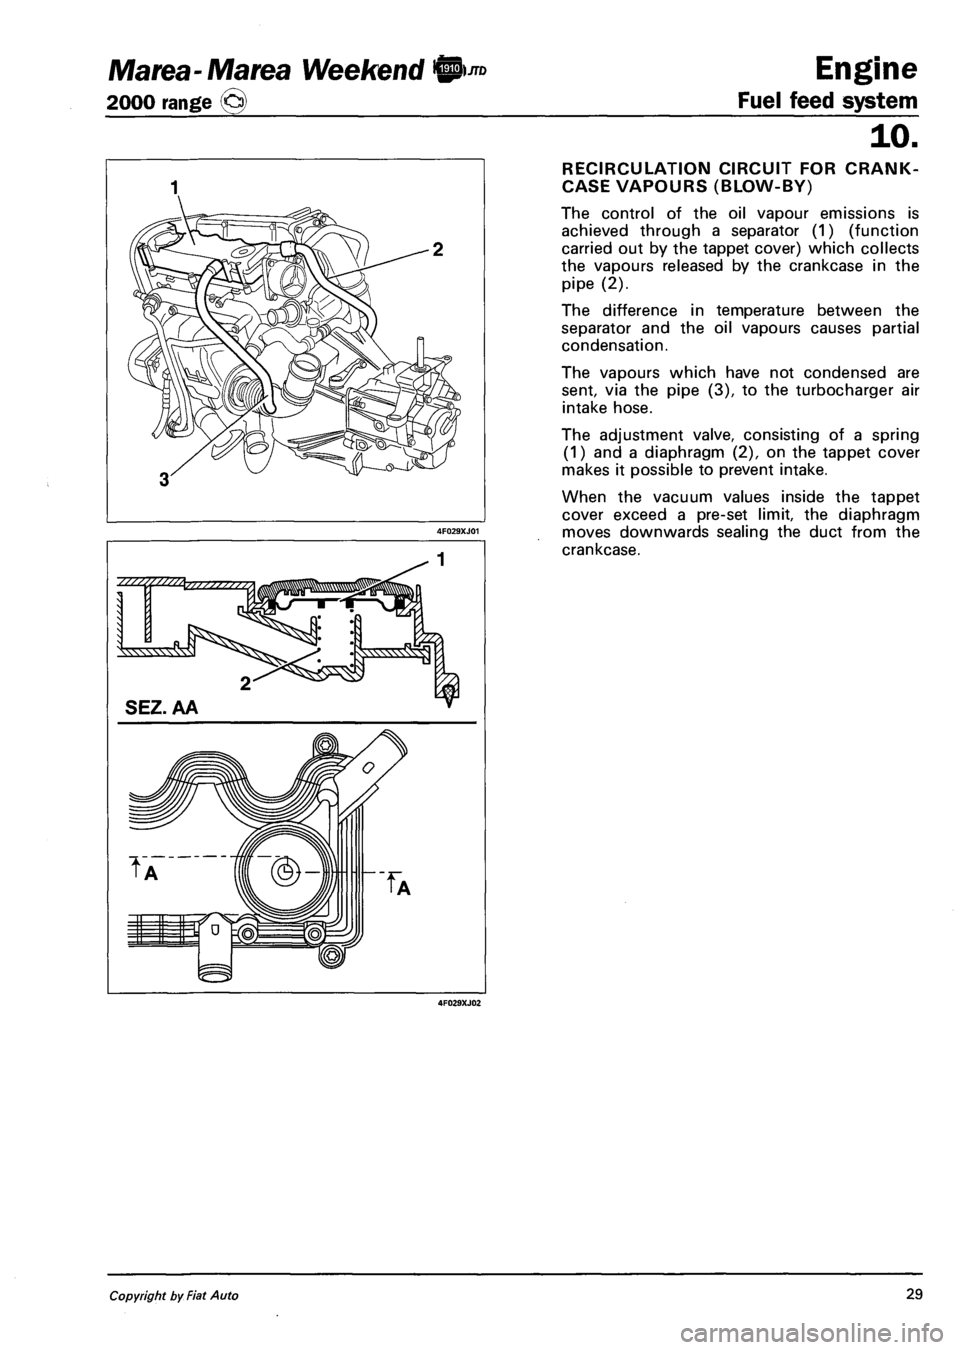 FIAT MAREA 2001 1.G Workshop Manual Marea-Marea Weekend 
2000 range (j§)  
1 
4F029XJ02 
Engine 
Fuel feed system 
10. 
RECIRCULATION CIRCUIT FOR CRANK-
CASE VAPOURS (BLOW-BY) 
The control of the oil vapour emissions is 
achieved throu